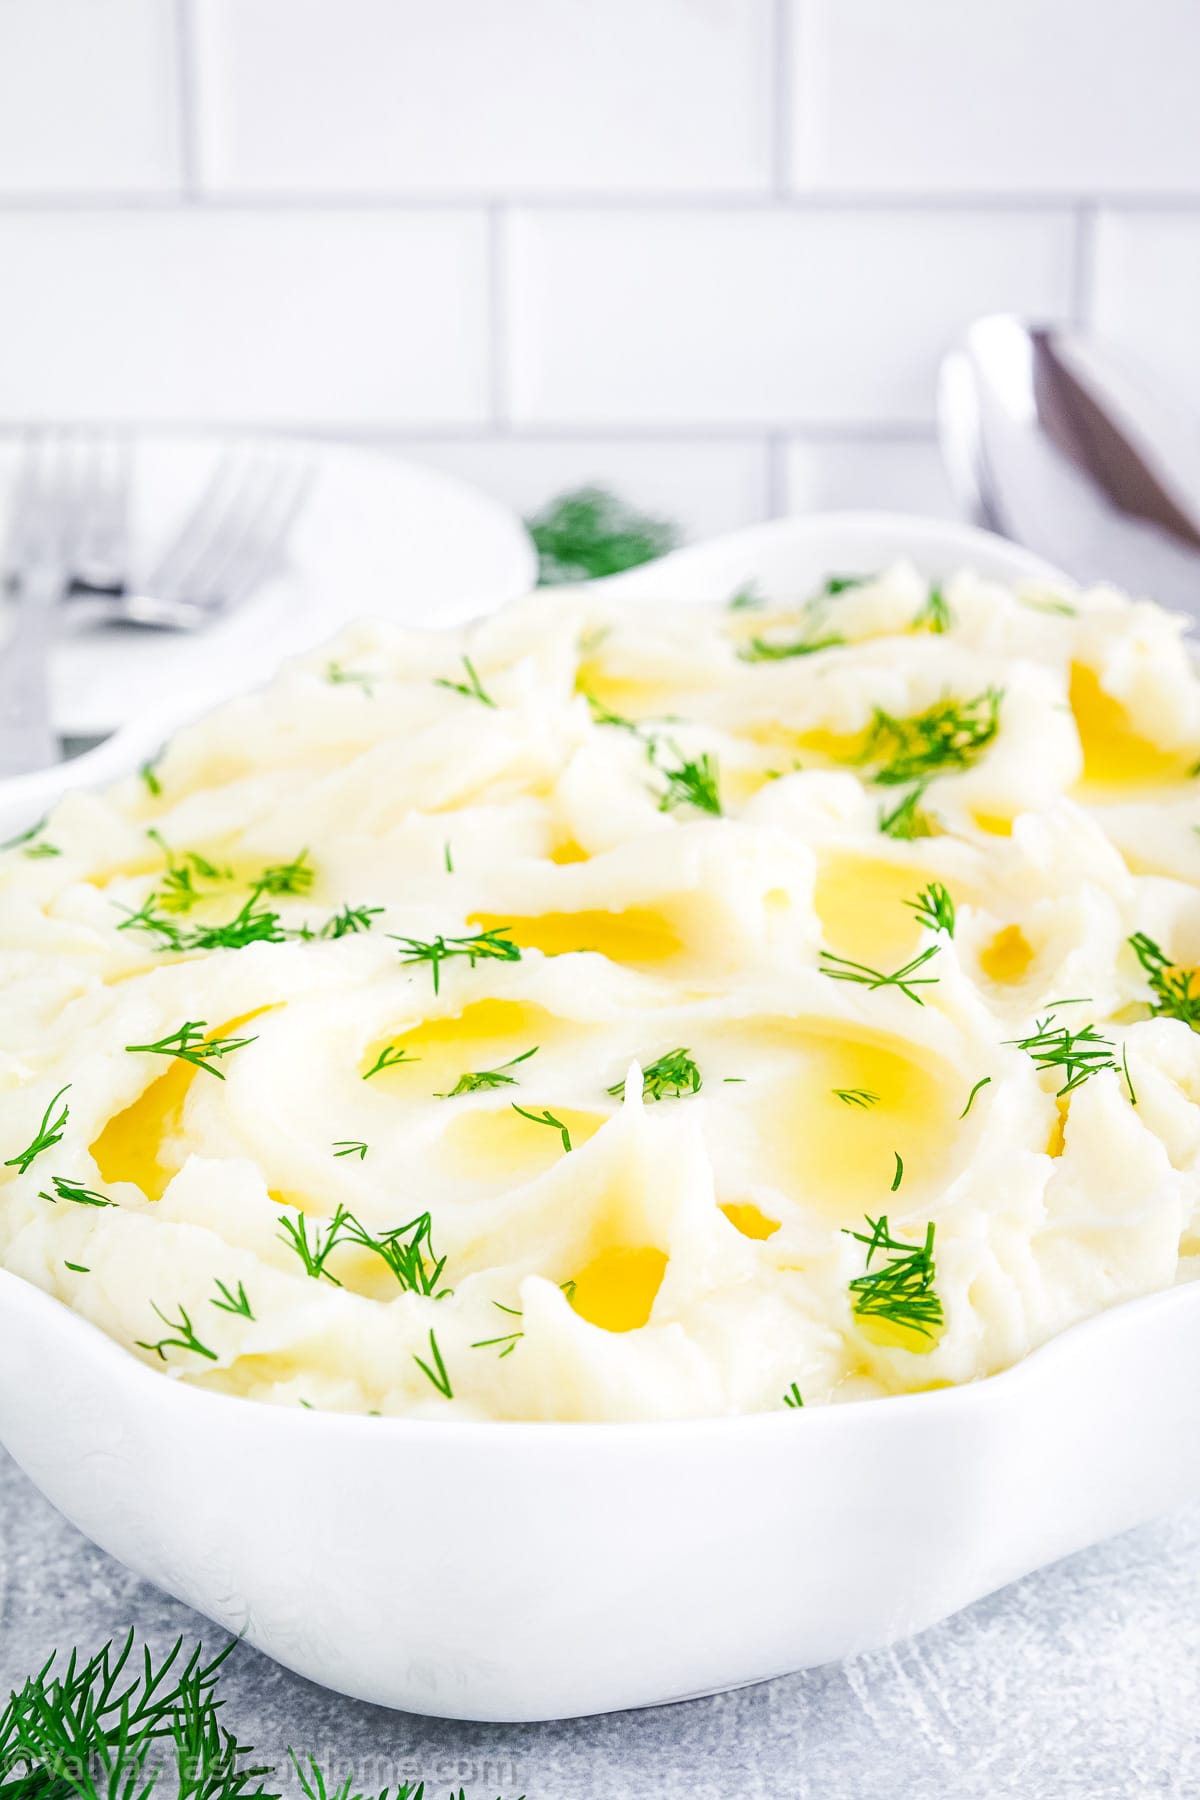 Mashed potato puree is a smooth, creamy, and flavorful side dish that goes beyond your typical mashed potato recipe. It’s creamier, heartier, and absolutely delicious.